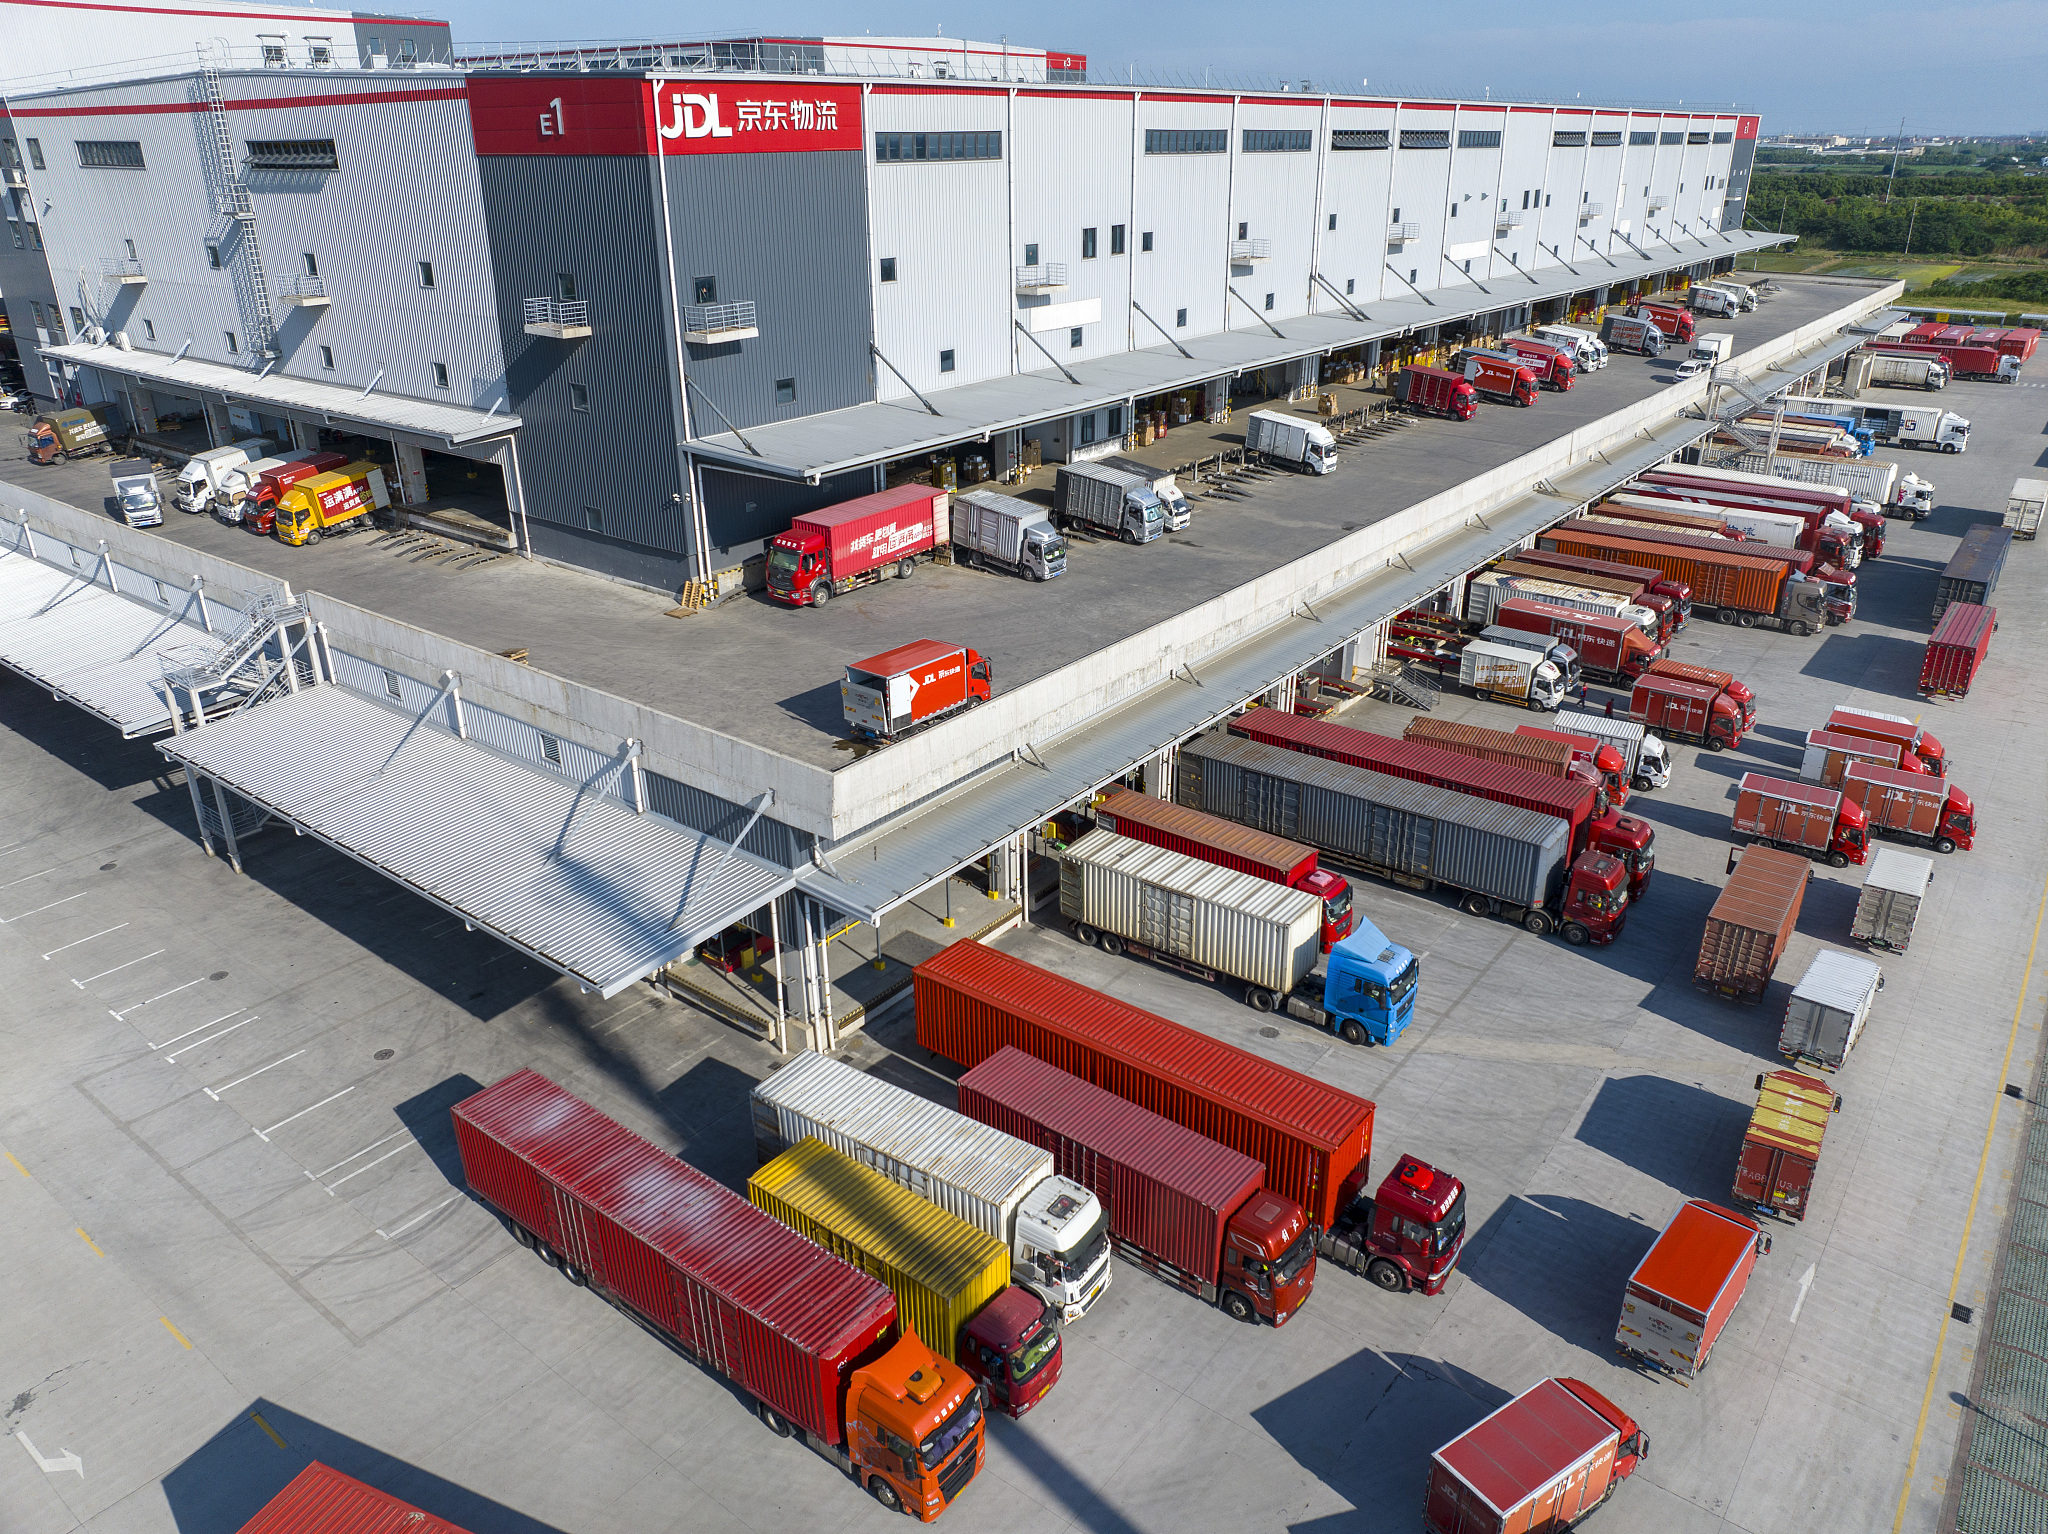 In a logistics park in Jiangsu Province, many express logistics trucks line up waiting to load and unload goods during China's mid-year online shopping festival known as the 